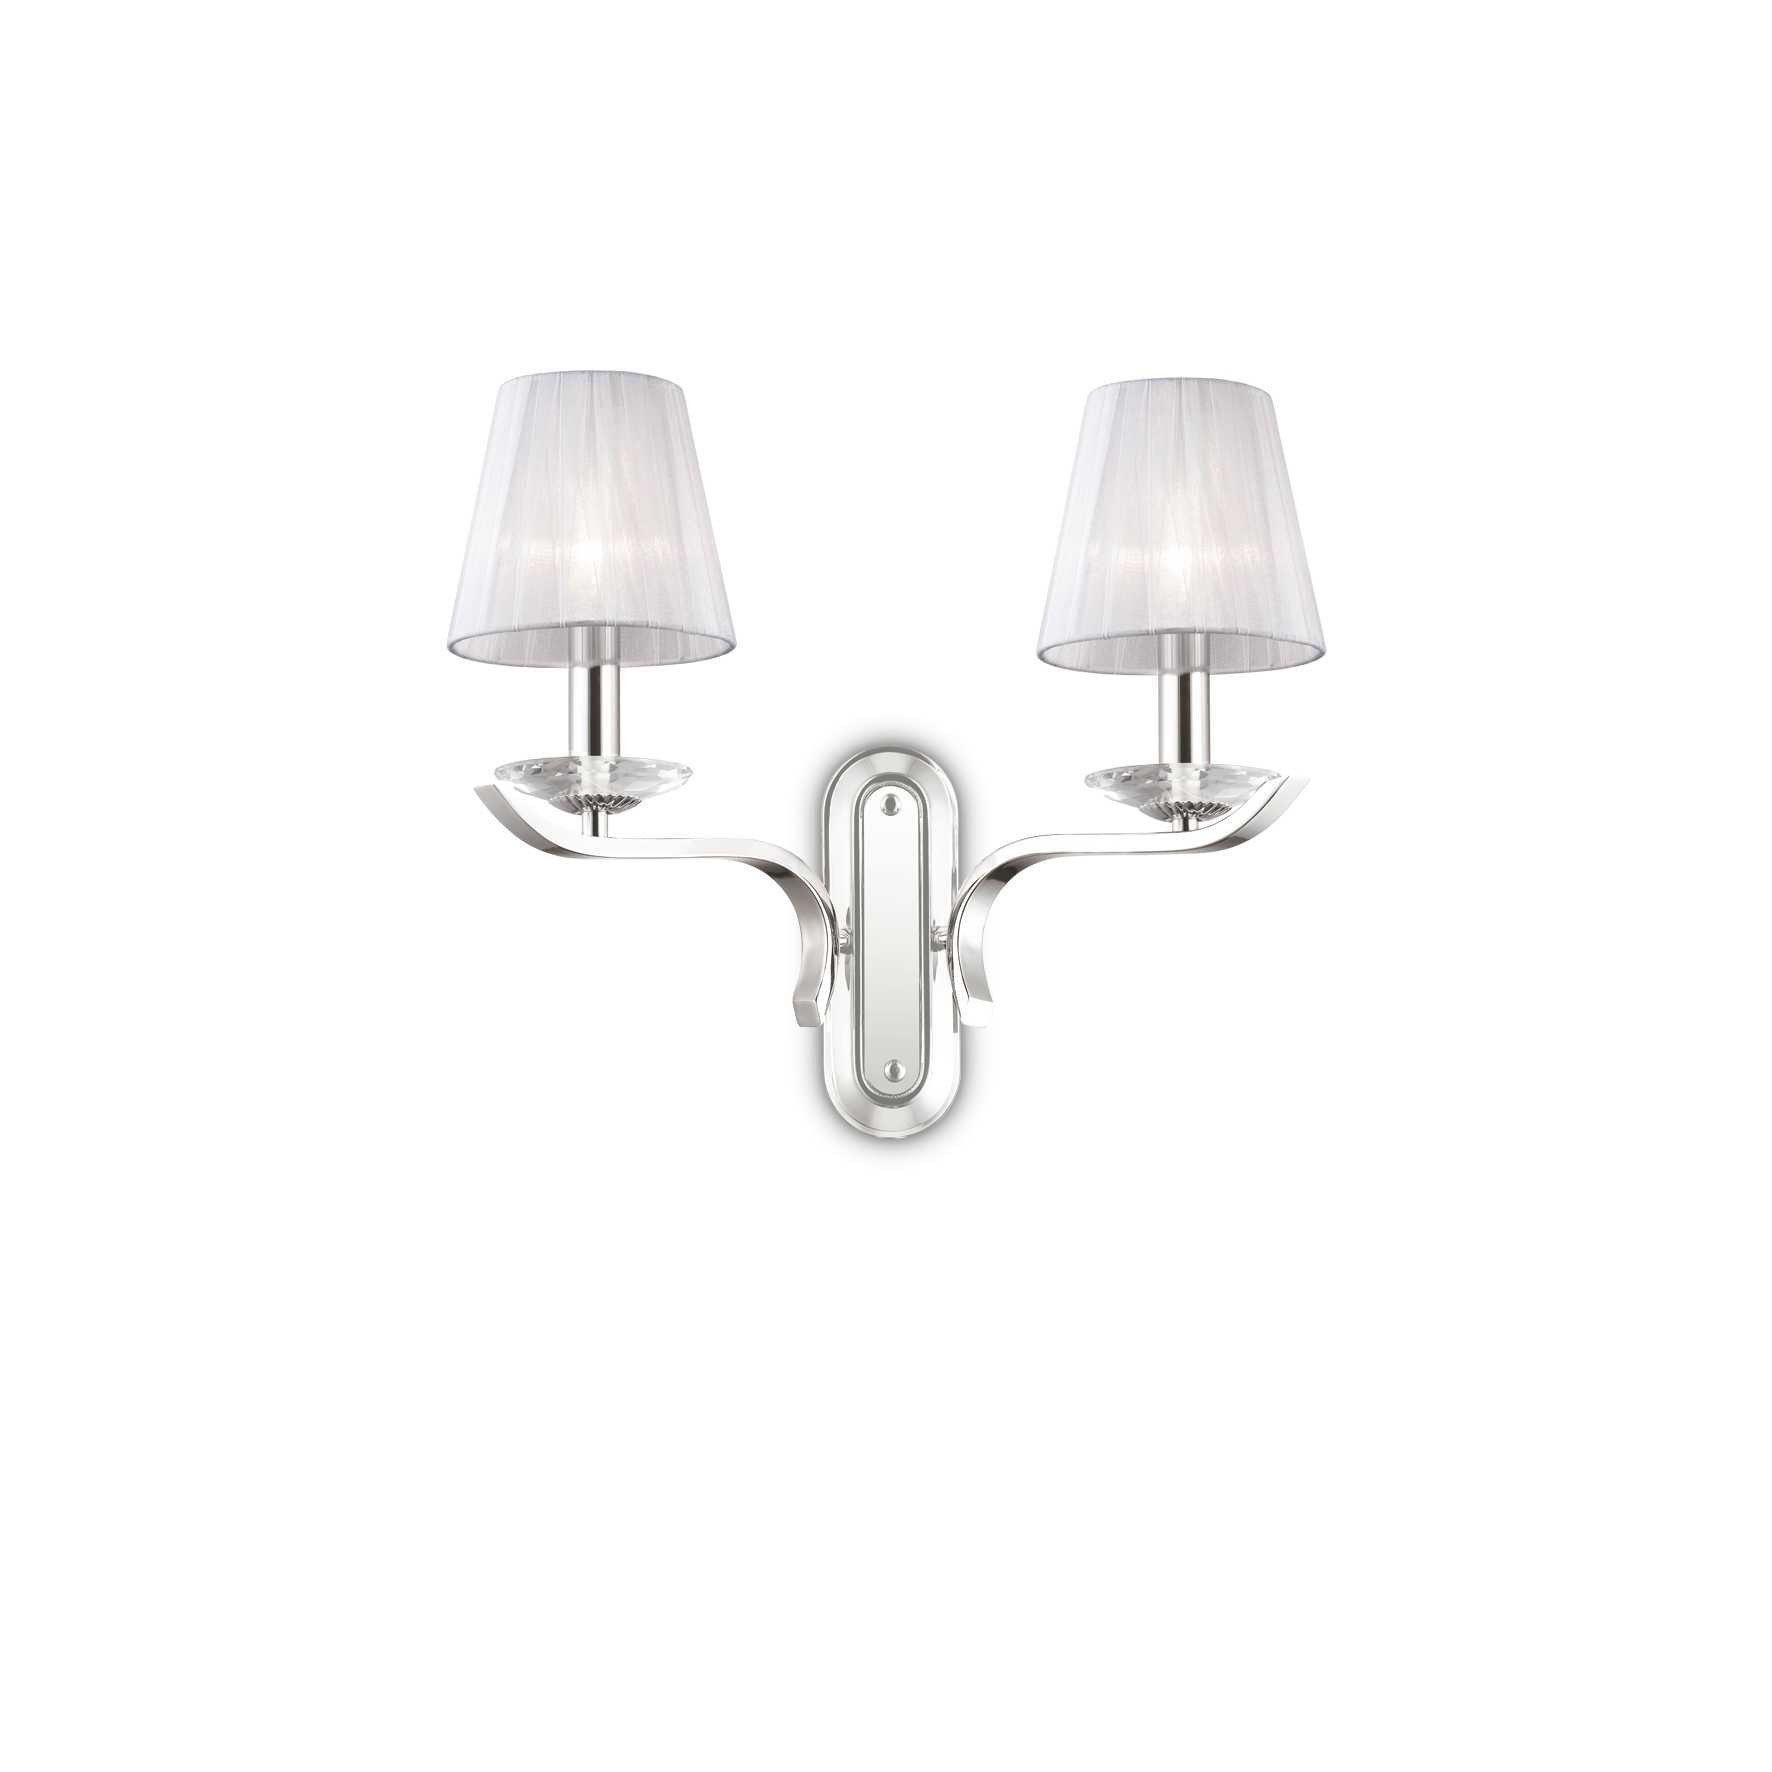 Pegaso 2 Light Indoor Candle Wall Light Chrome White with Organza Shades E14